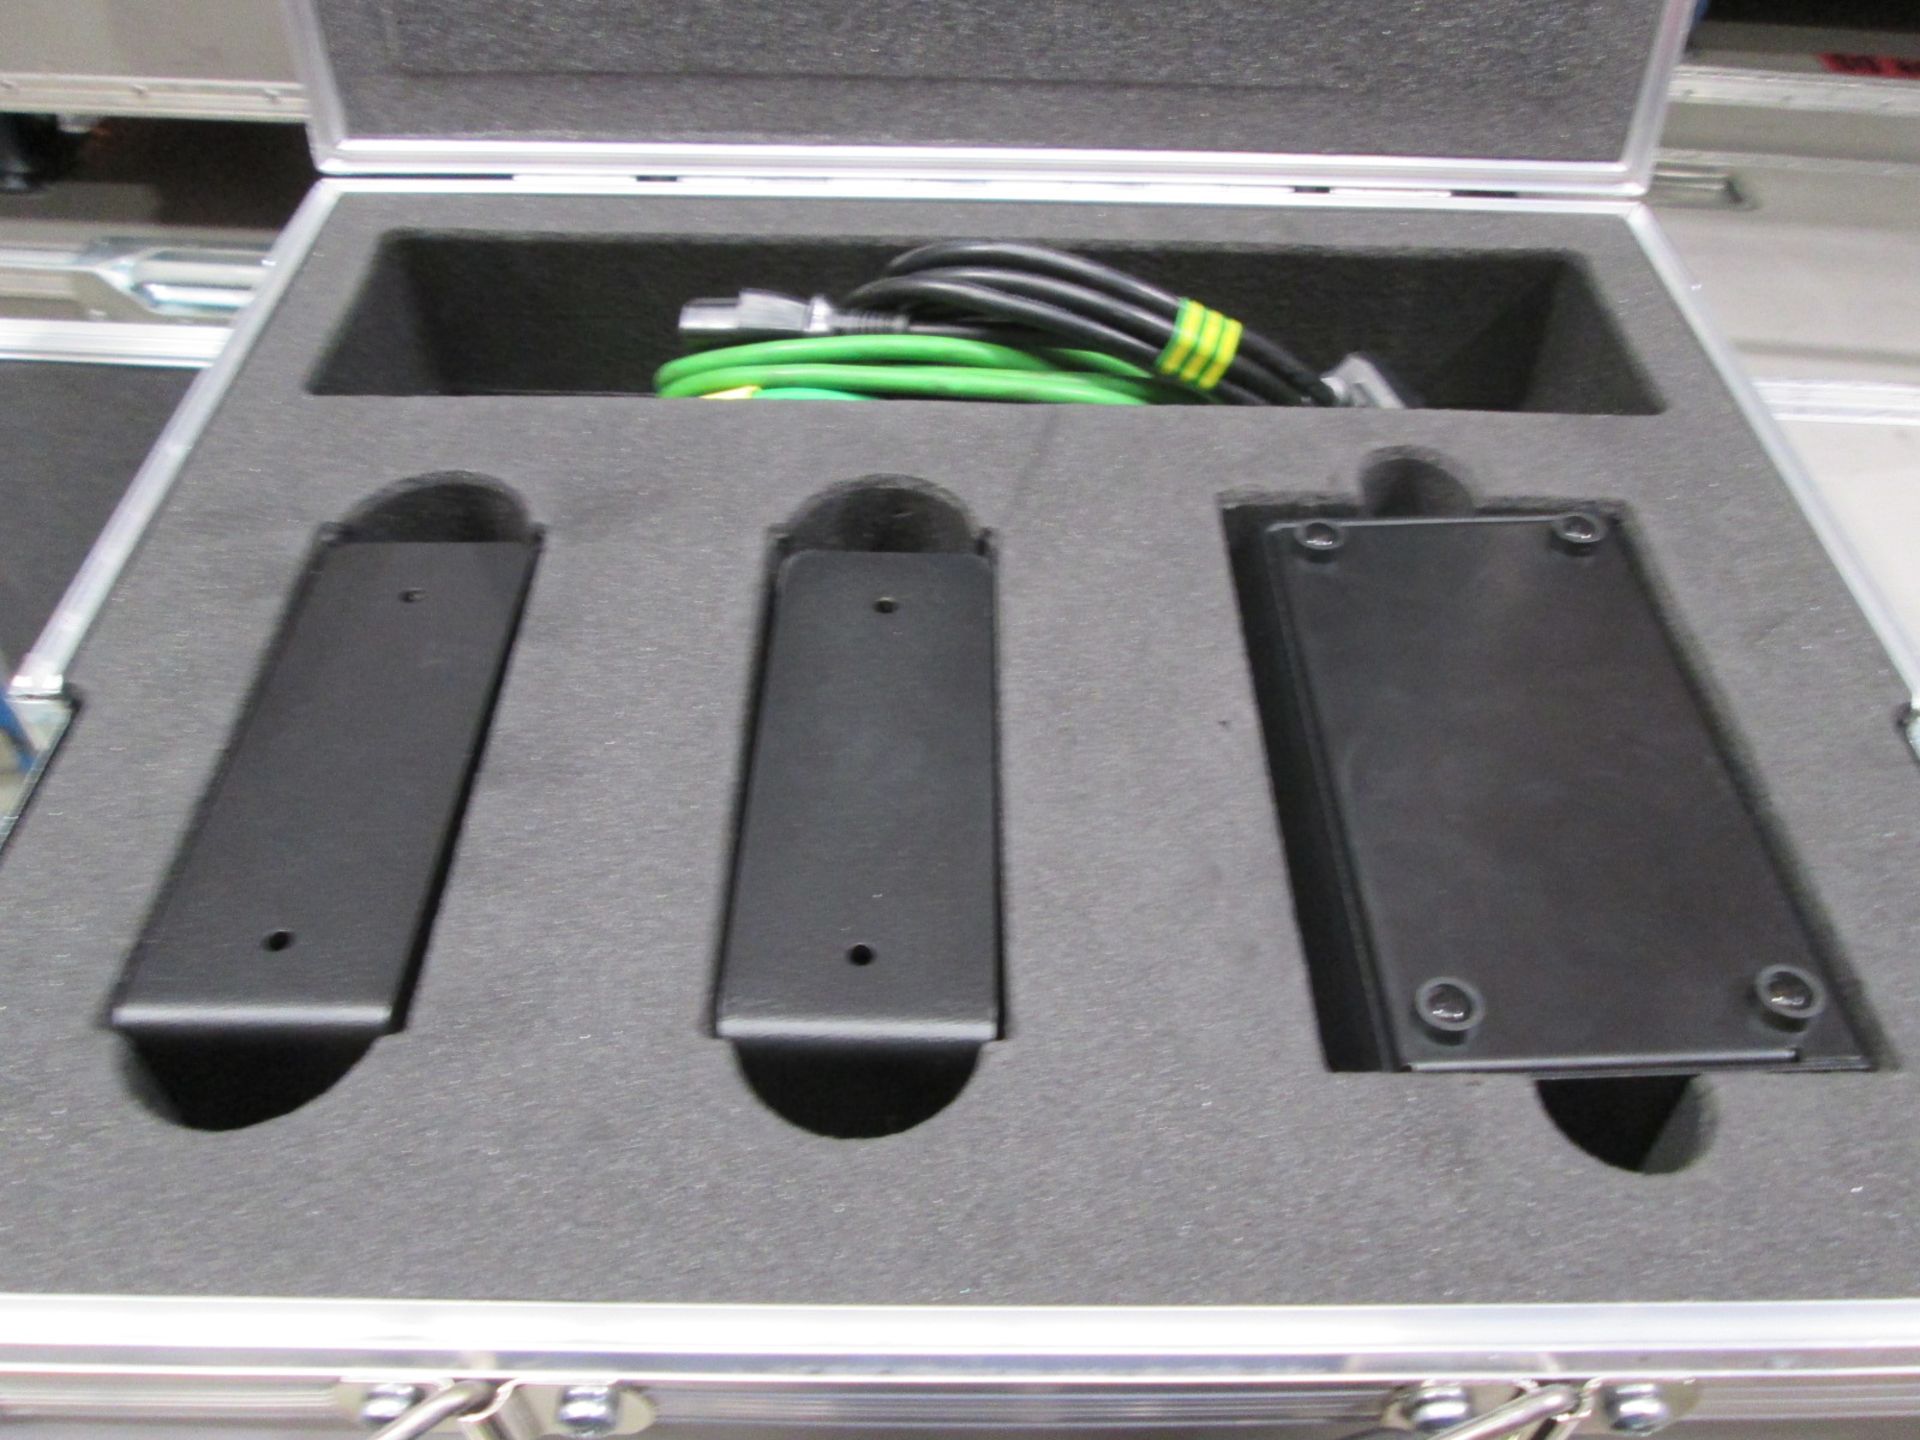 Interspace Industries Countdown Touch with 2 x CDD1 remote Displays, In flight case (Qty 2) - Image 5 of 6